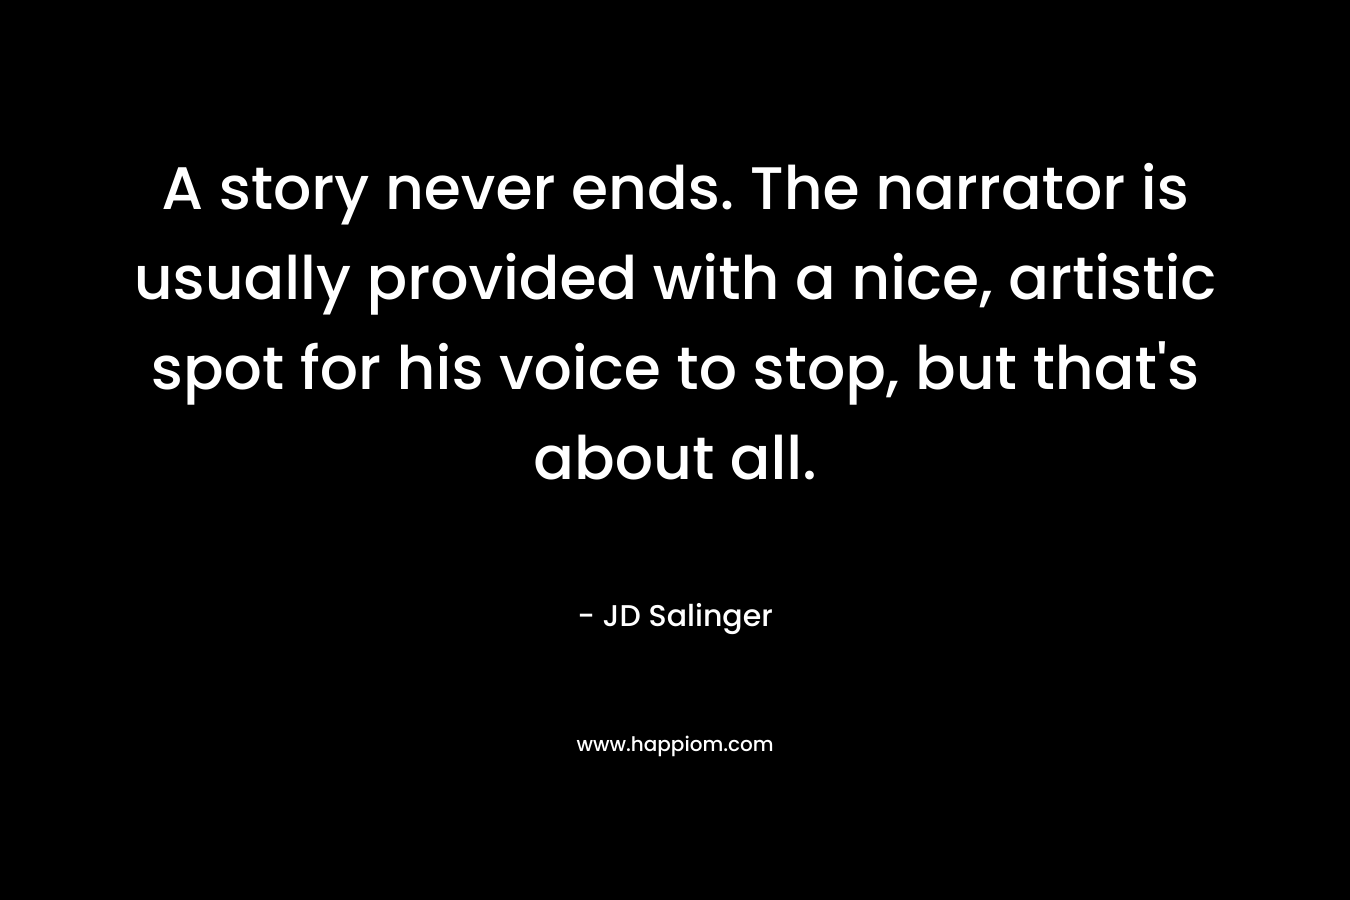 A story never ends. The narrator is usually provided with a nice, artistic spot for his voice to stop, but that’s about all. – JD Salinger